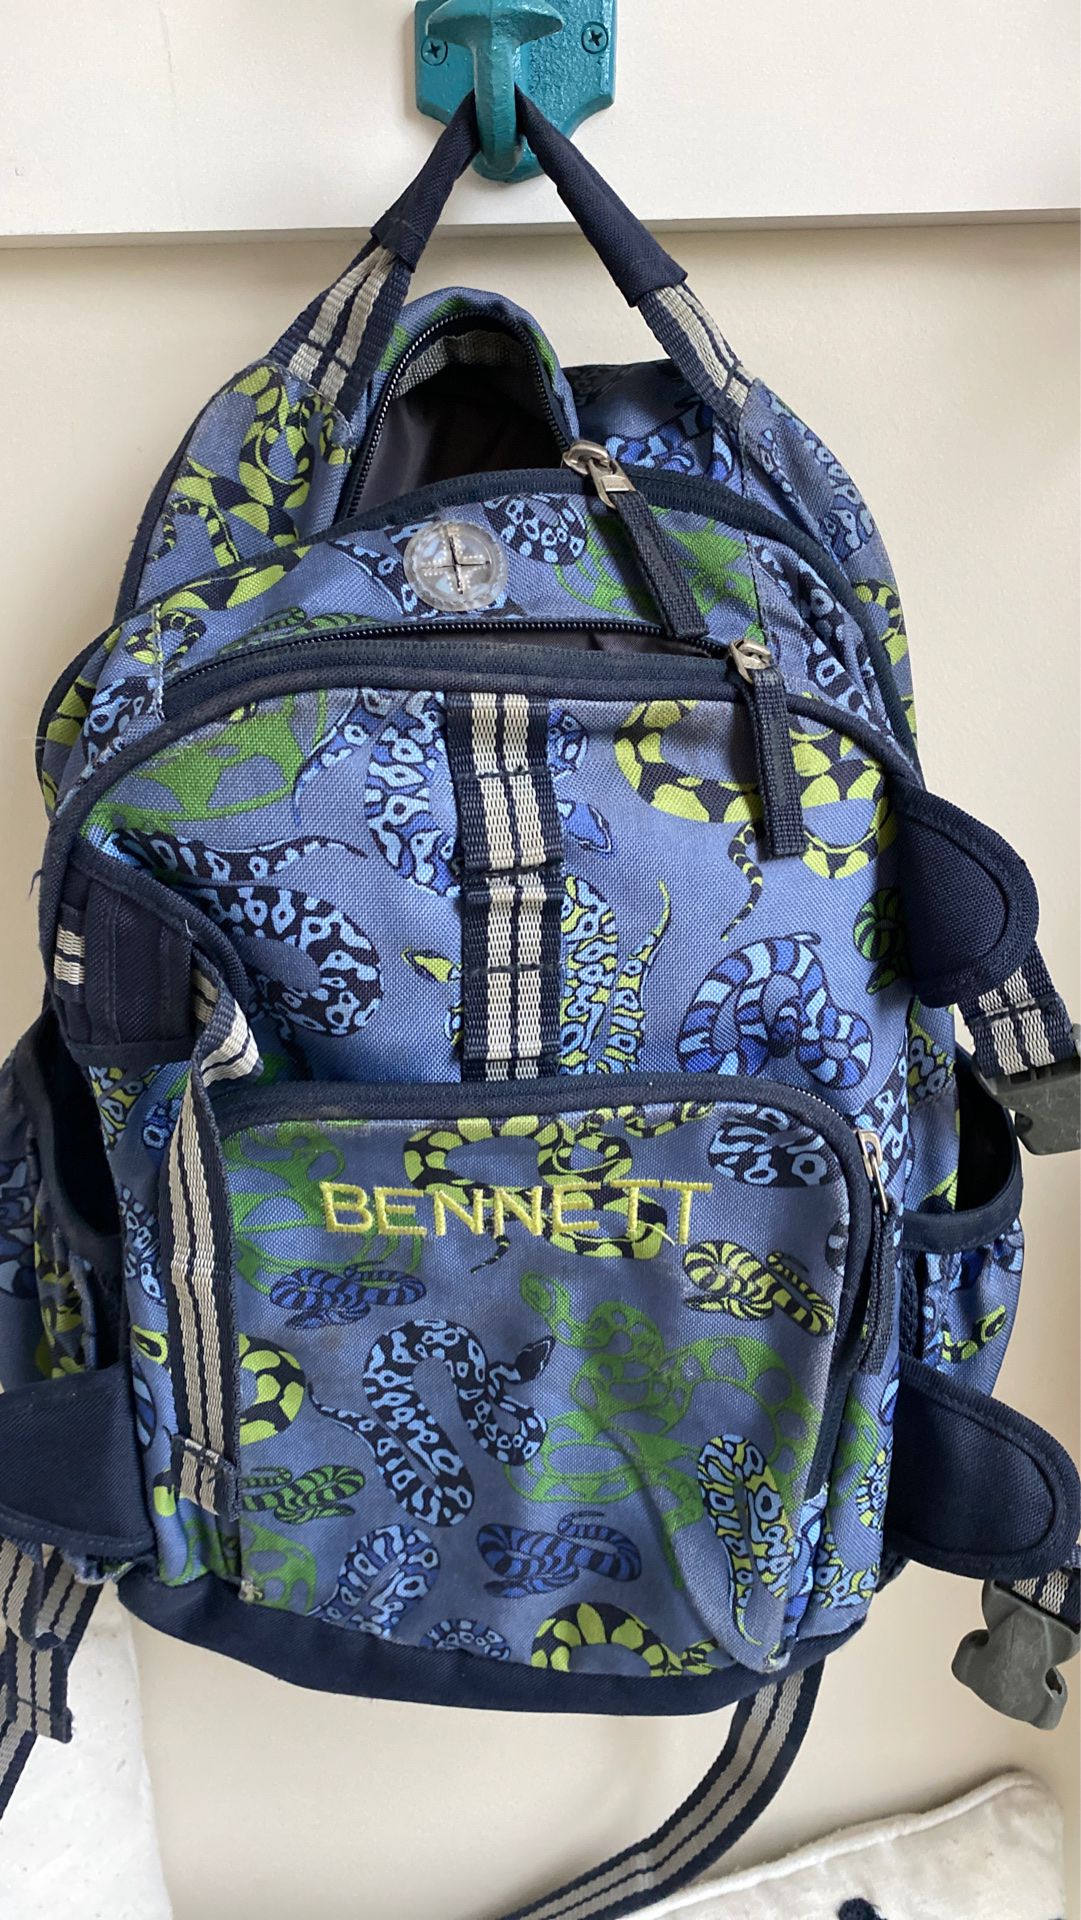 Pottery Barn youth backpack with snakes - BENNETT